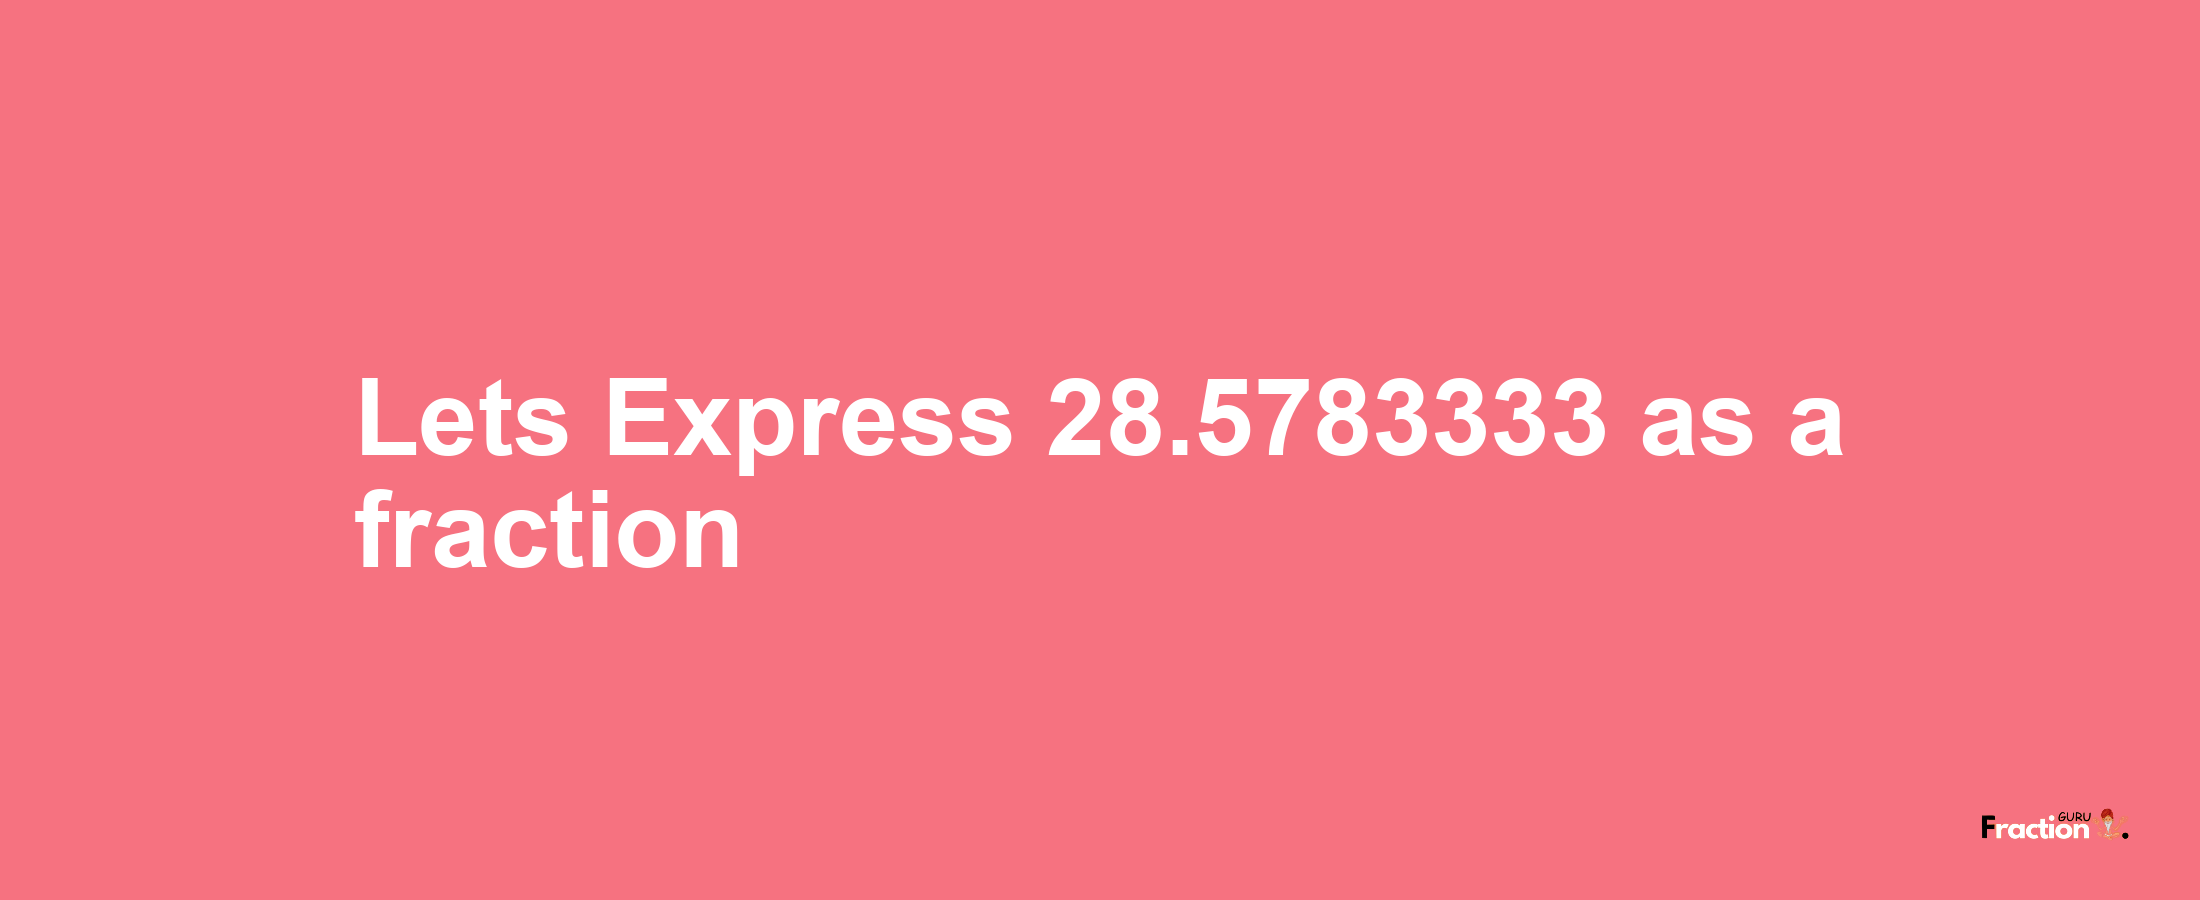 Lets Express 28.5783333 as afraction